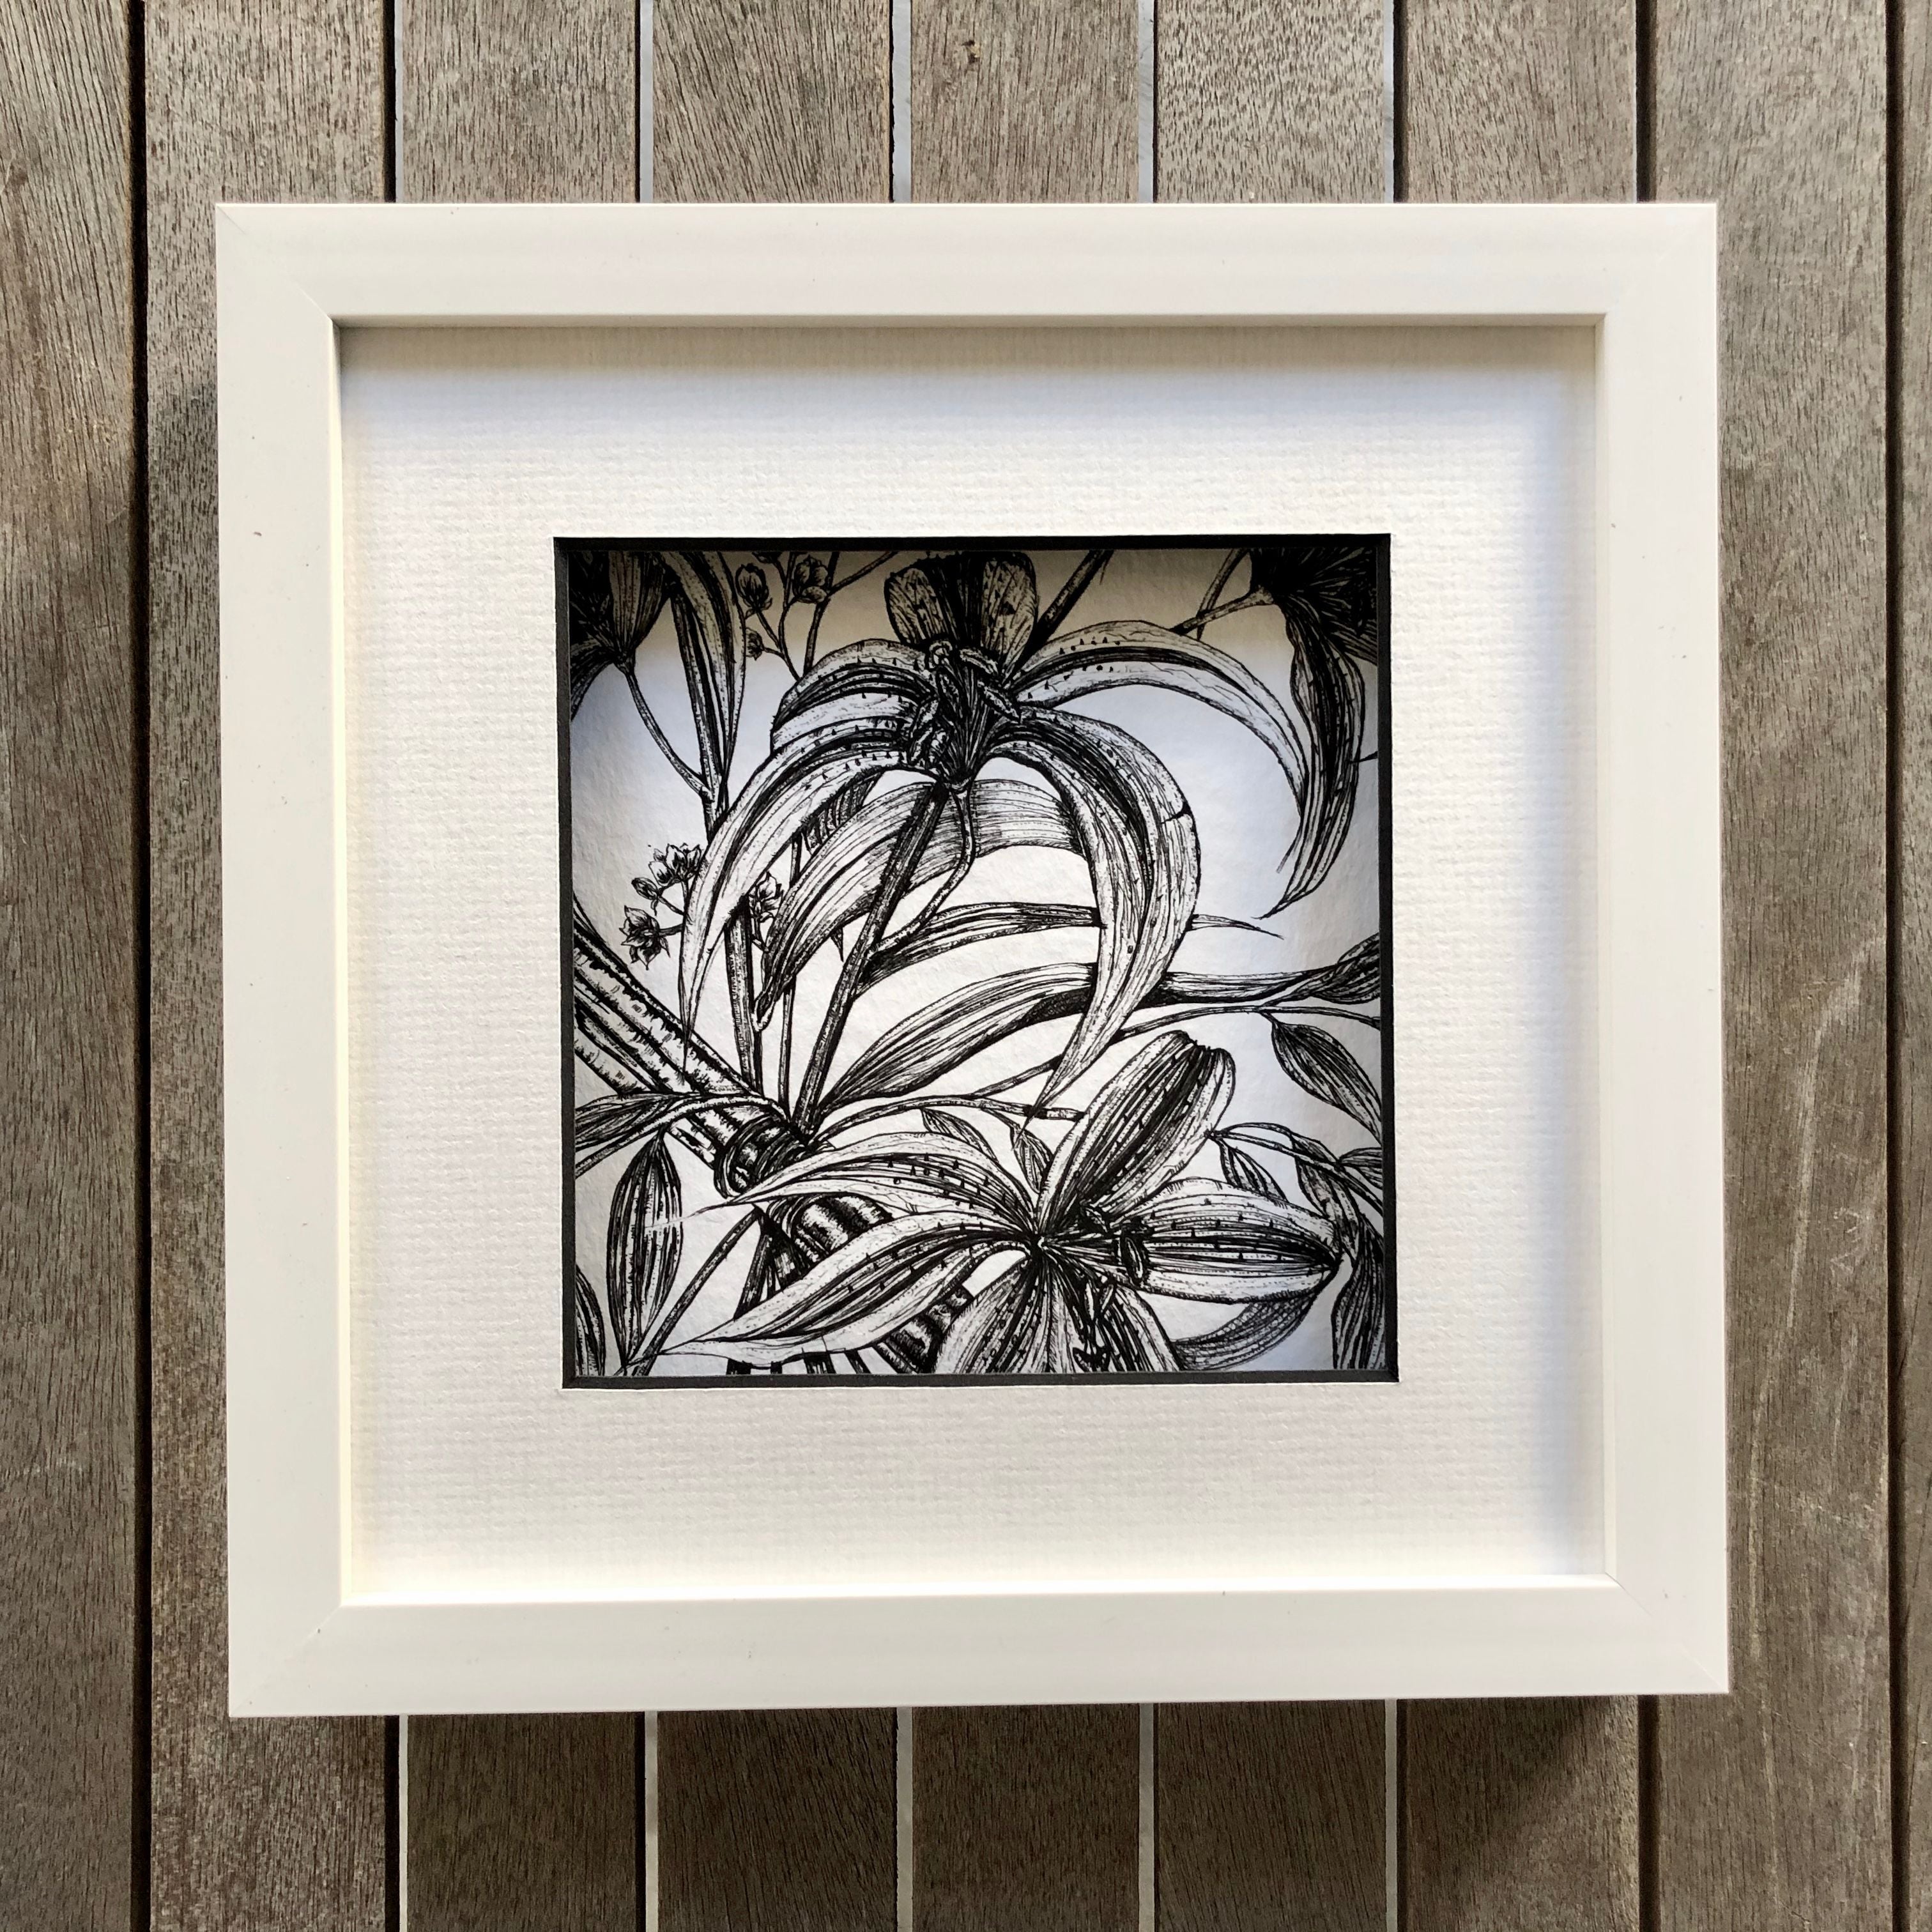 Detailed illustration of stargazer lilies and cinnamon in a white frame.